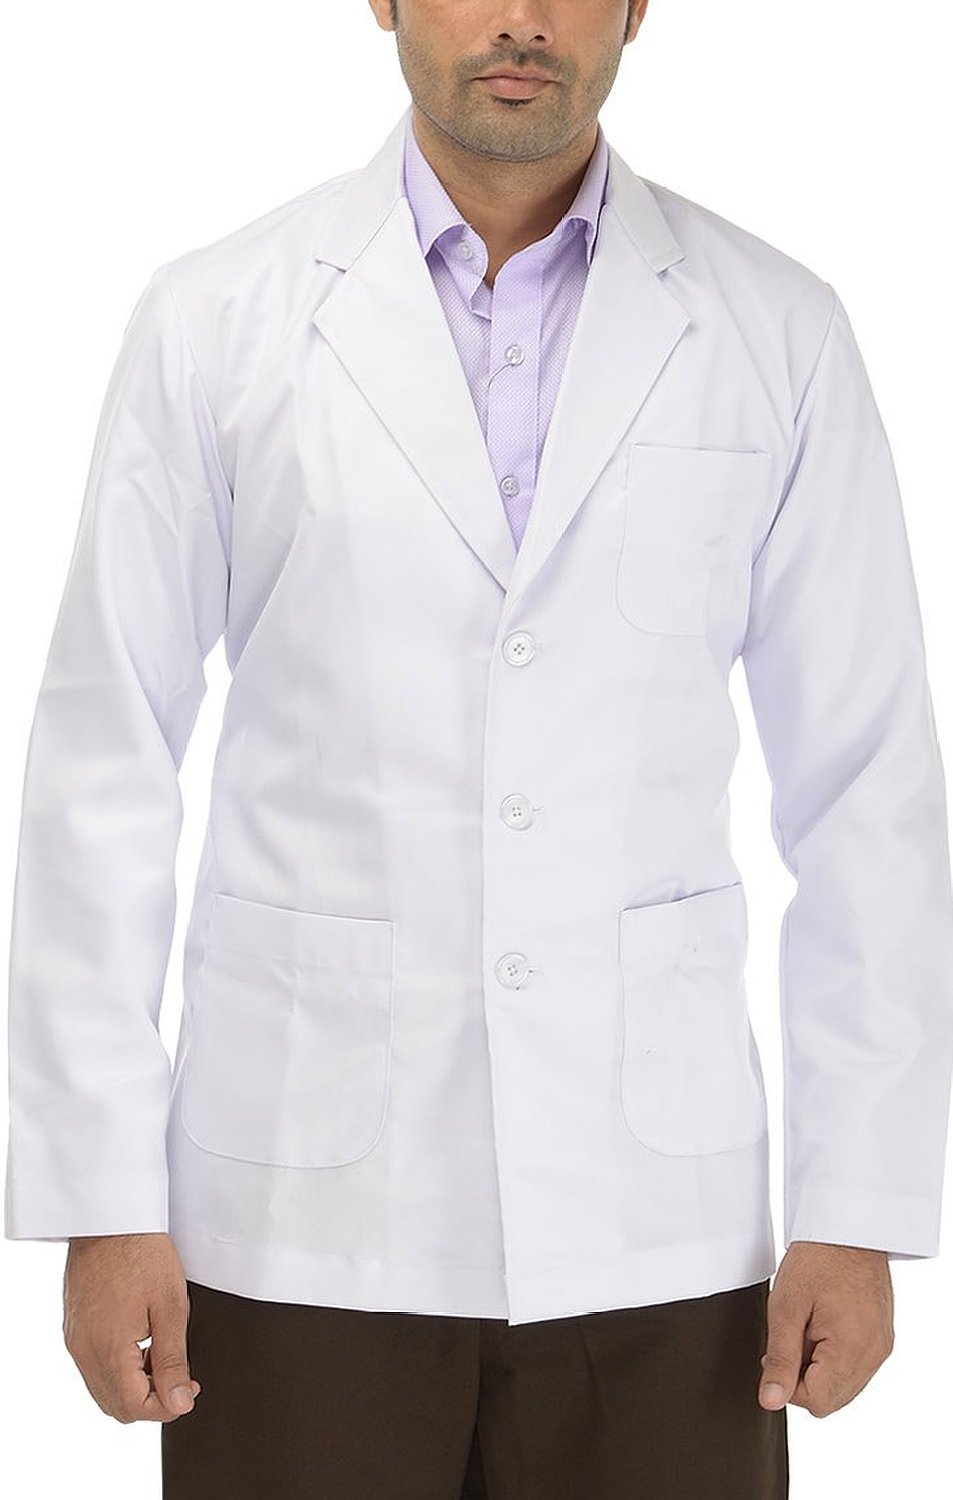 Perfect Doctor's Lab Coat (Unisex) Full Sleeves - White | Buy Online at